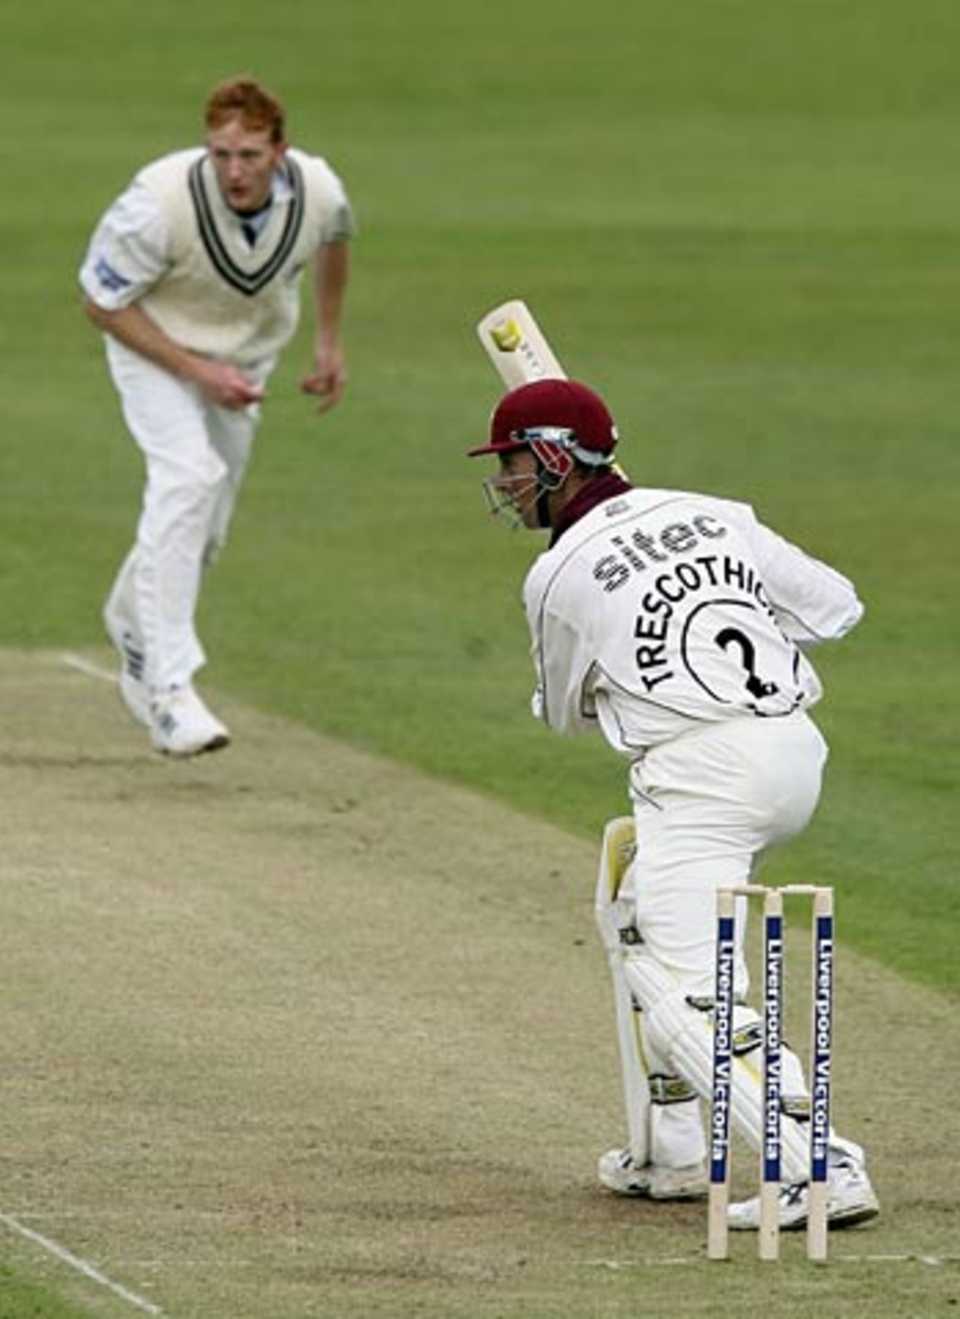 Marcus Trescothick leans into a drive off Steve Kirby, Gloucestershire v Somerset, County Championship, Bristol, April 19, 2006